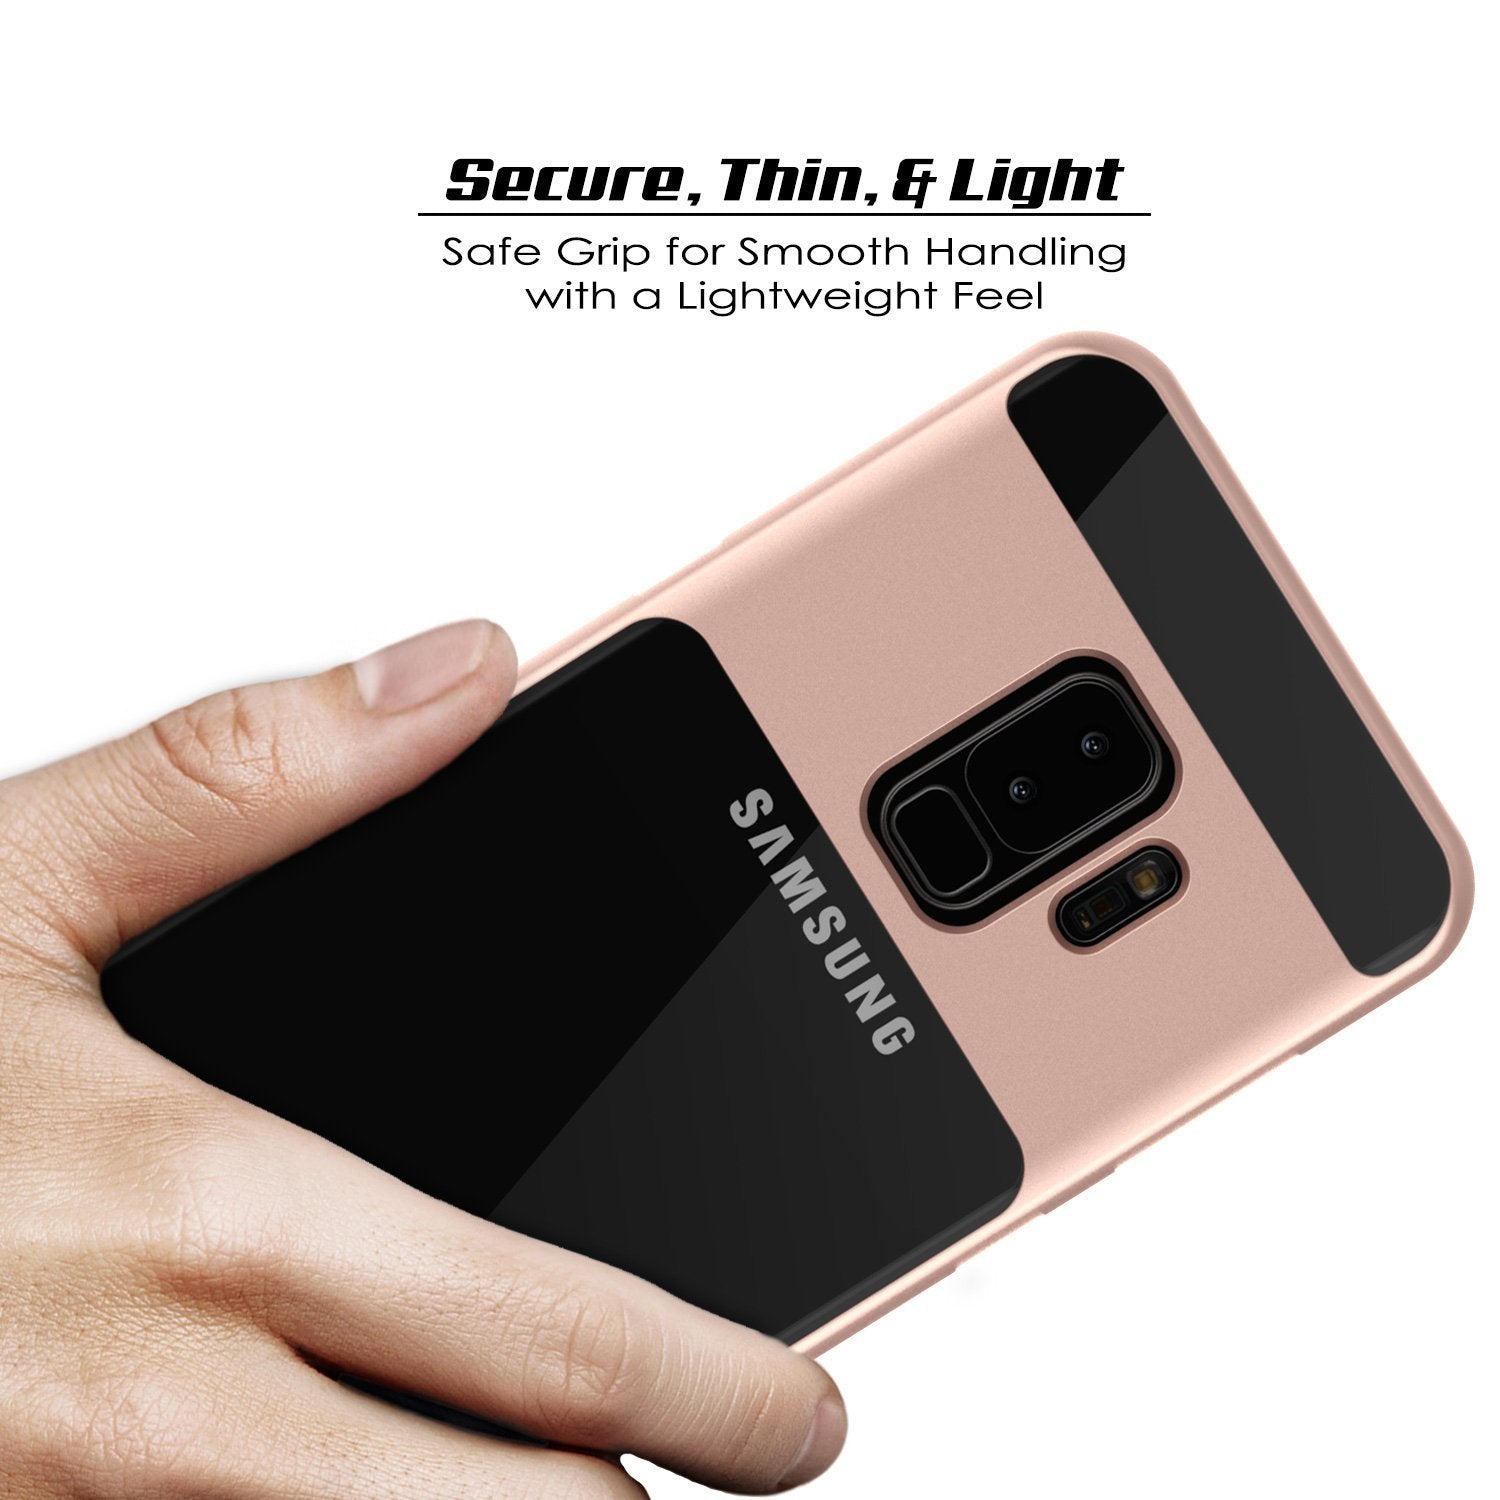 Galaxy S9+ Plus Case, PUNKcase [LUCID 3.0 Series] [Slim Fit] [Clear Back] Armor Cover w/ Integrated Kickstand, Anti-Shock System & PUNKSHIELD Screen Protector for Samsung Galaxy S9+ Plus [Rose Gold] - PunkCase NZ